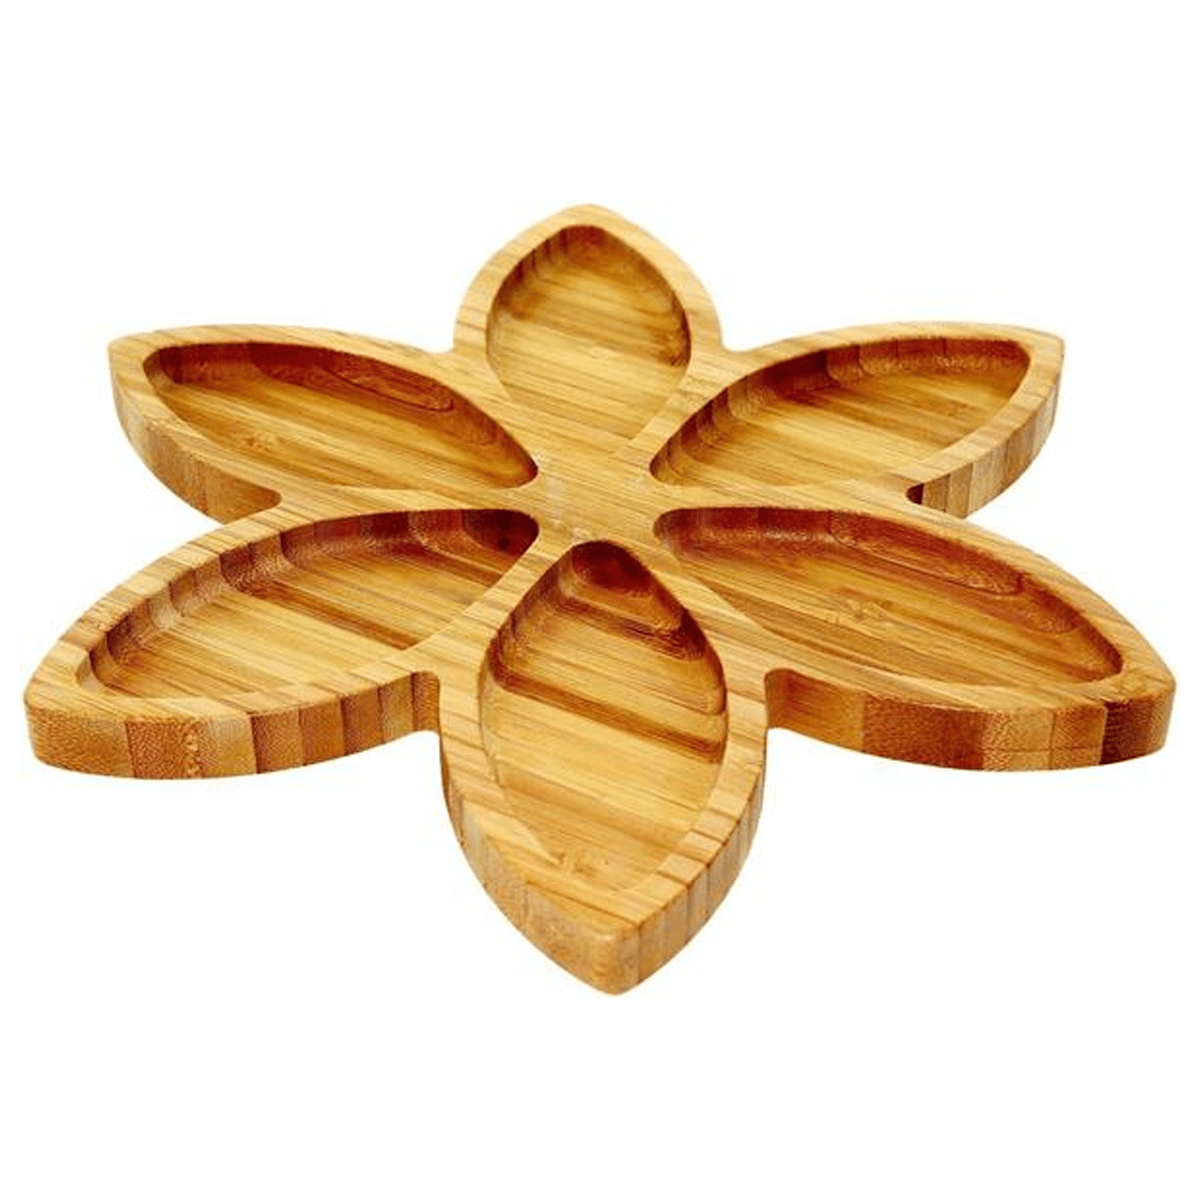 Liying Bamboo Brown Flower Shape Plates & Dishes